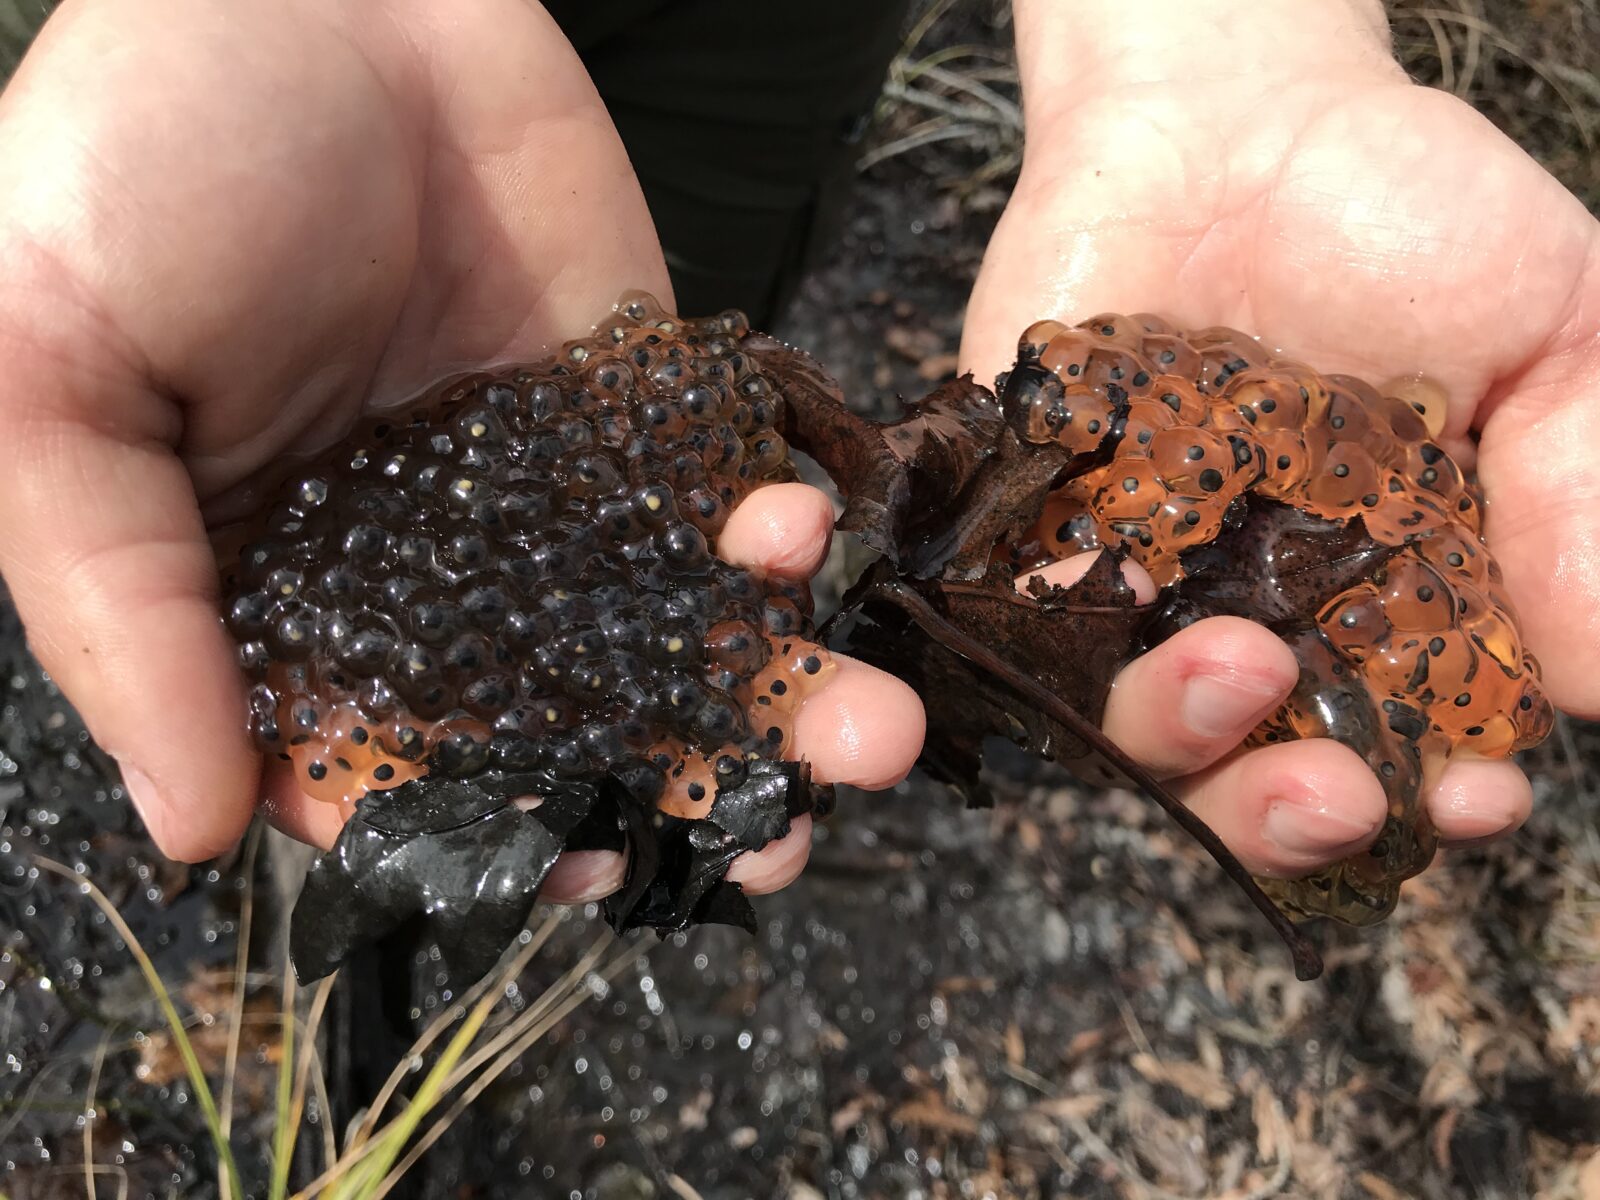 A comparison between dark orange with light dot leopard frog eggs and orange with black do wood frog eggs